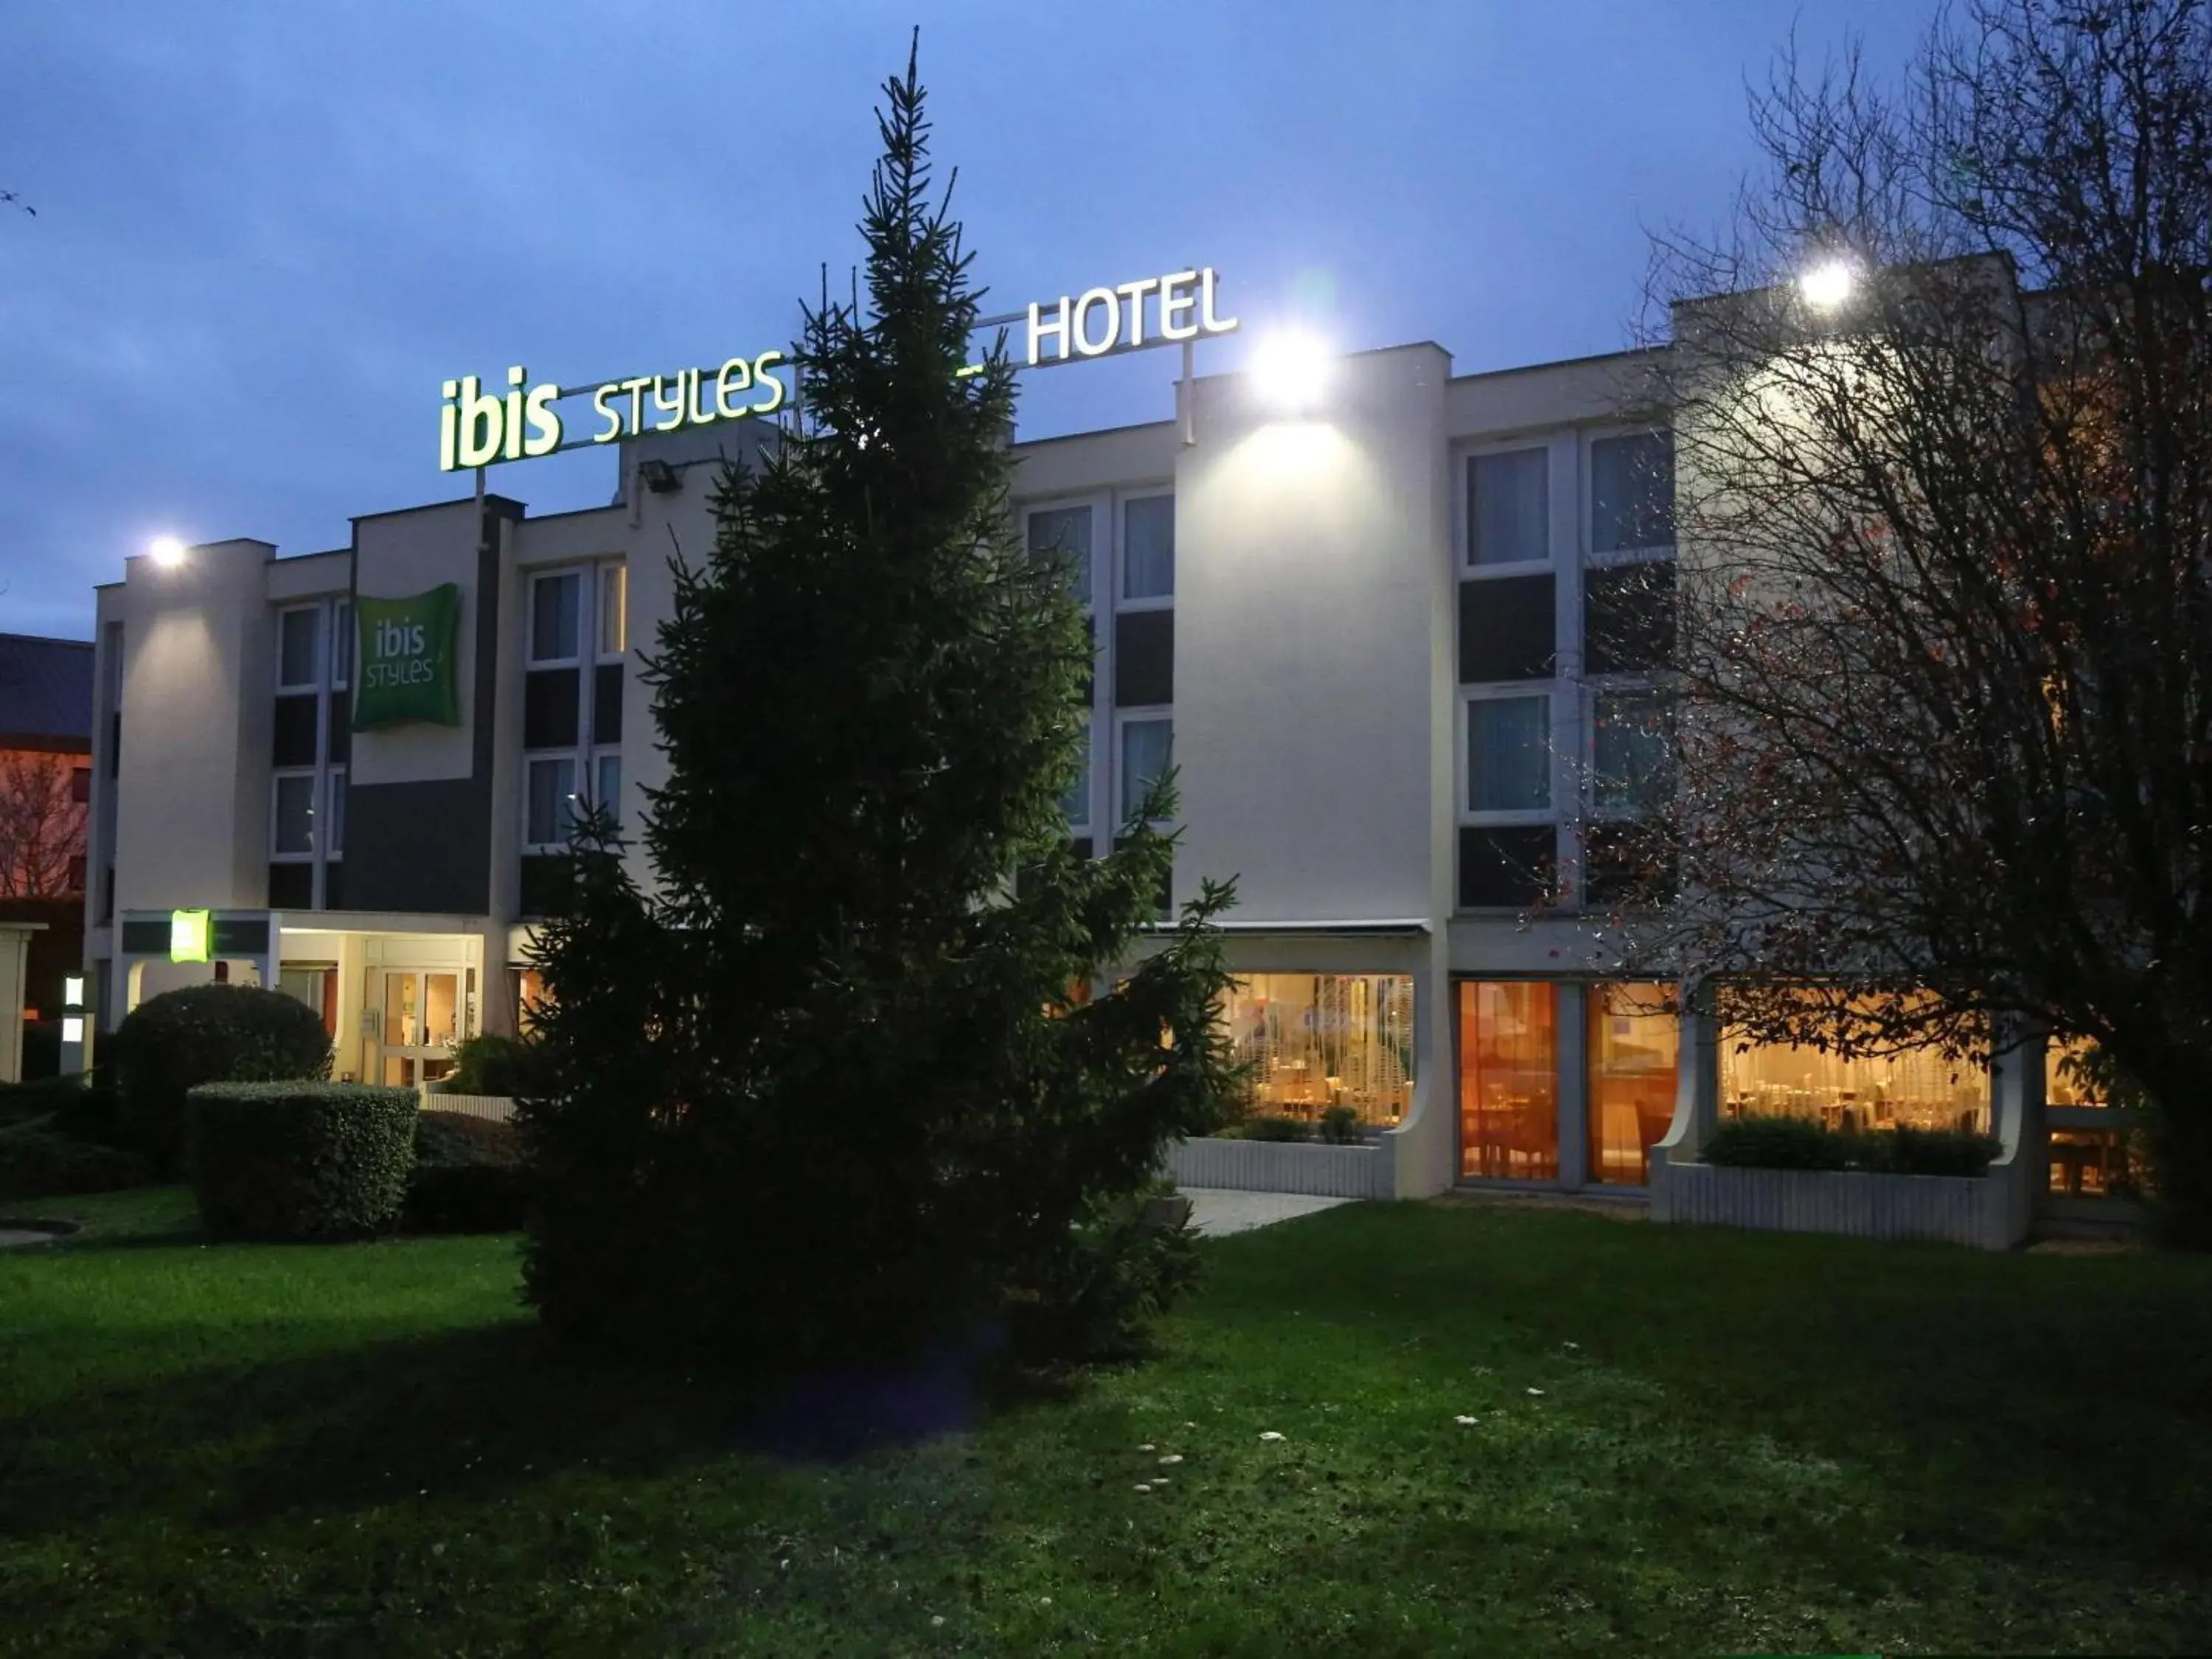 Property Building in ibis Styles Orleans